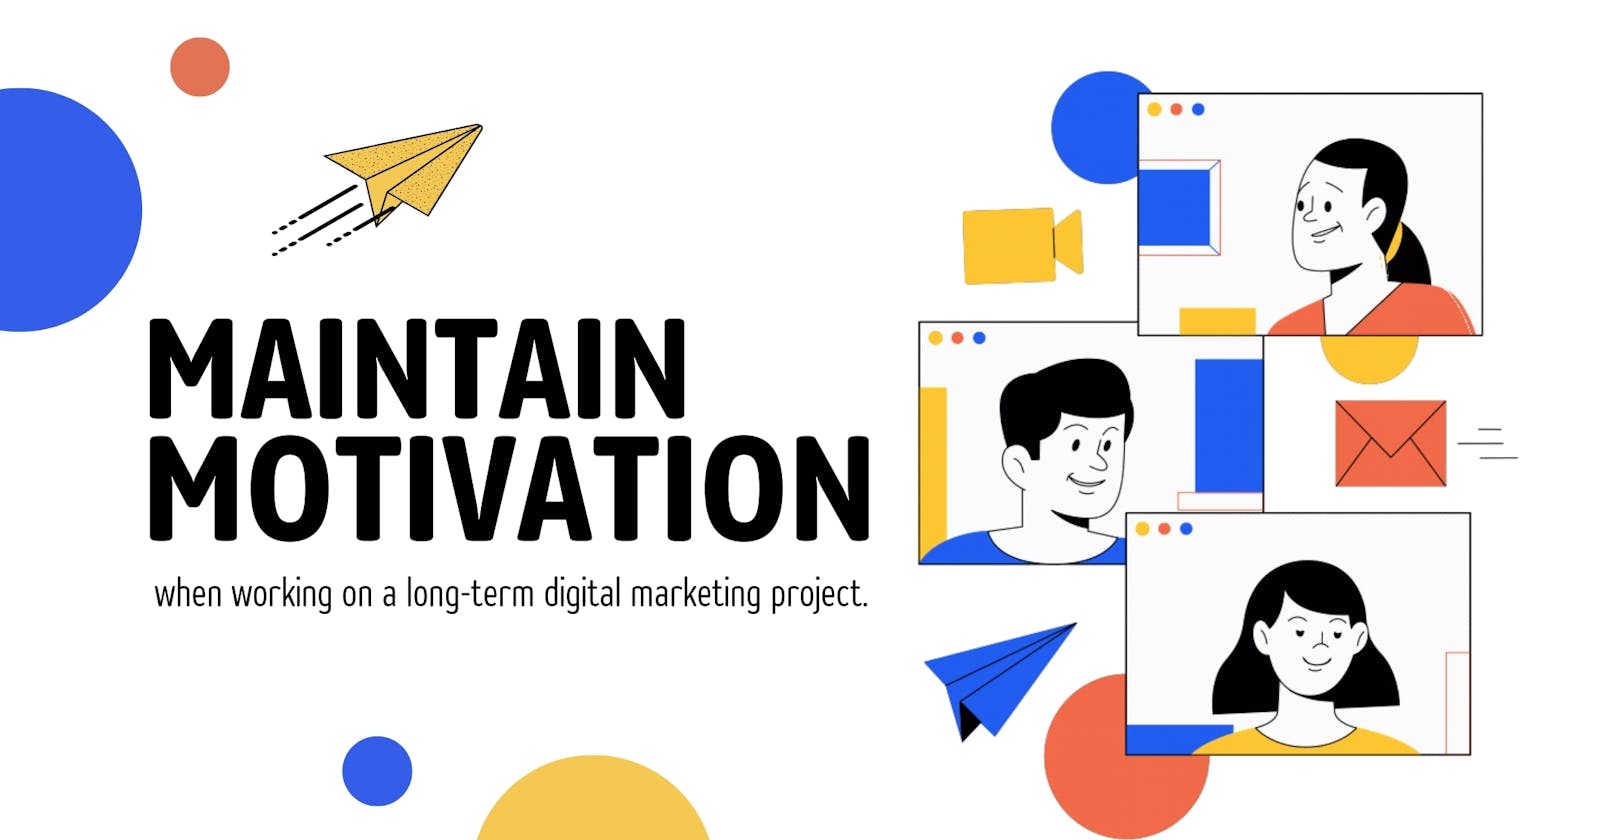 Maintain Motivation, when working on a long-term digital marketing project.